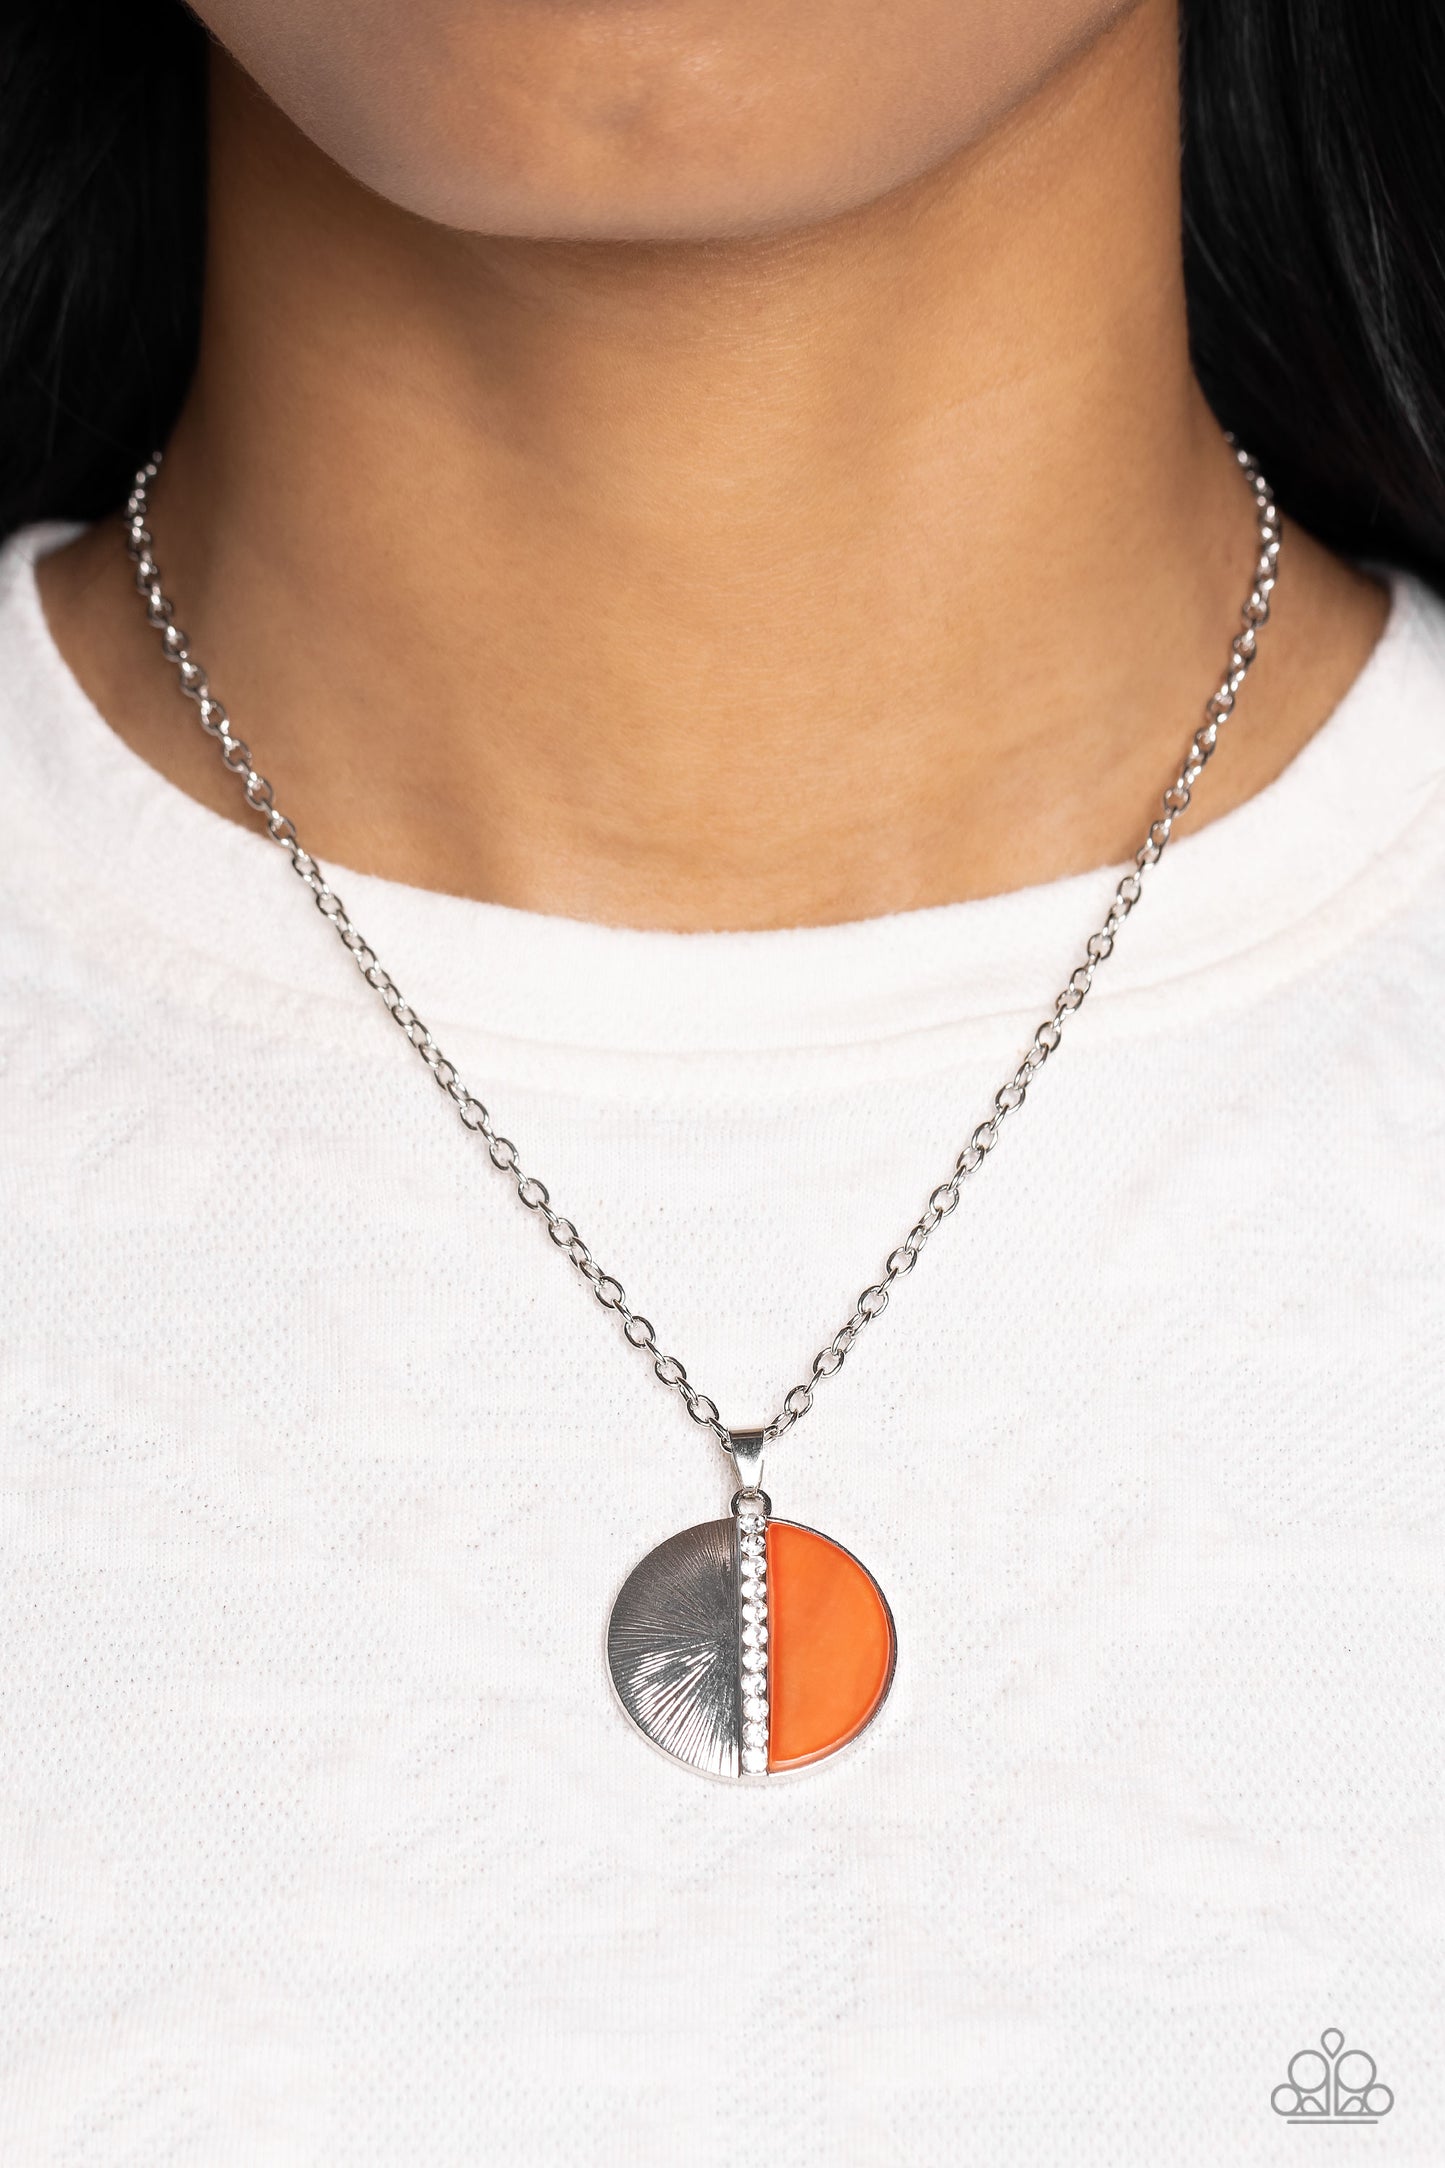 Paparazzi Accessories Captivating Contrast - Orange Embossed in radiant linear textures, a half-circle silver frame is nestled next to a half-circle coral shell for a colorful finish. White rhinestones dot down the center of the pendant for a spritz of gl